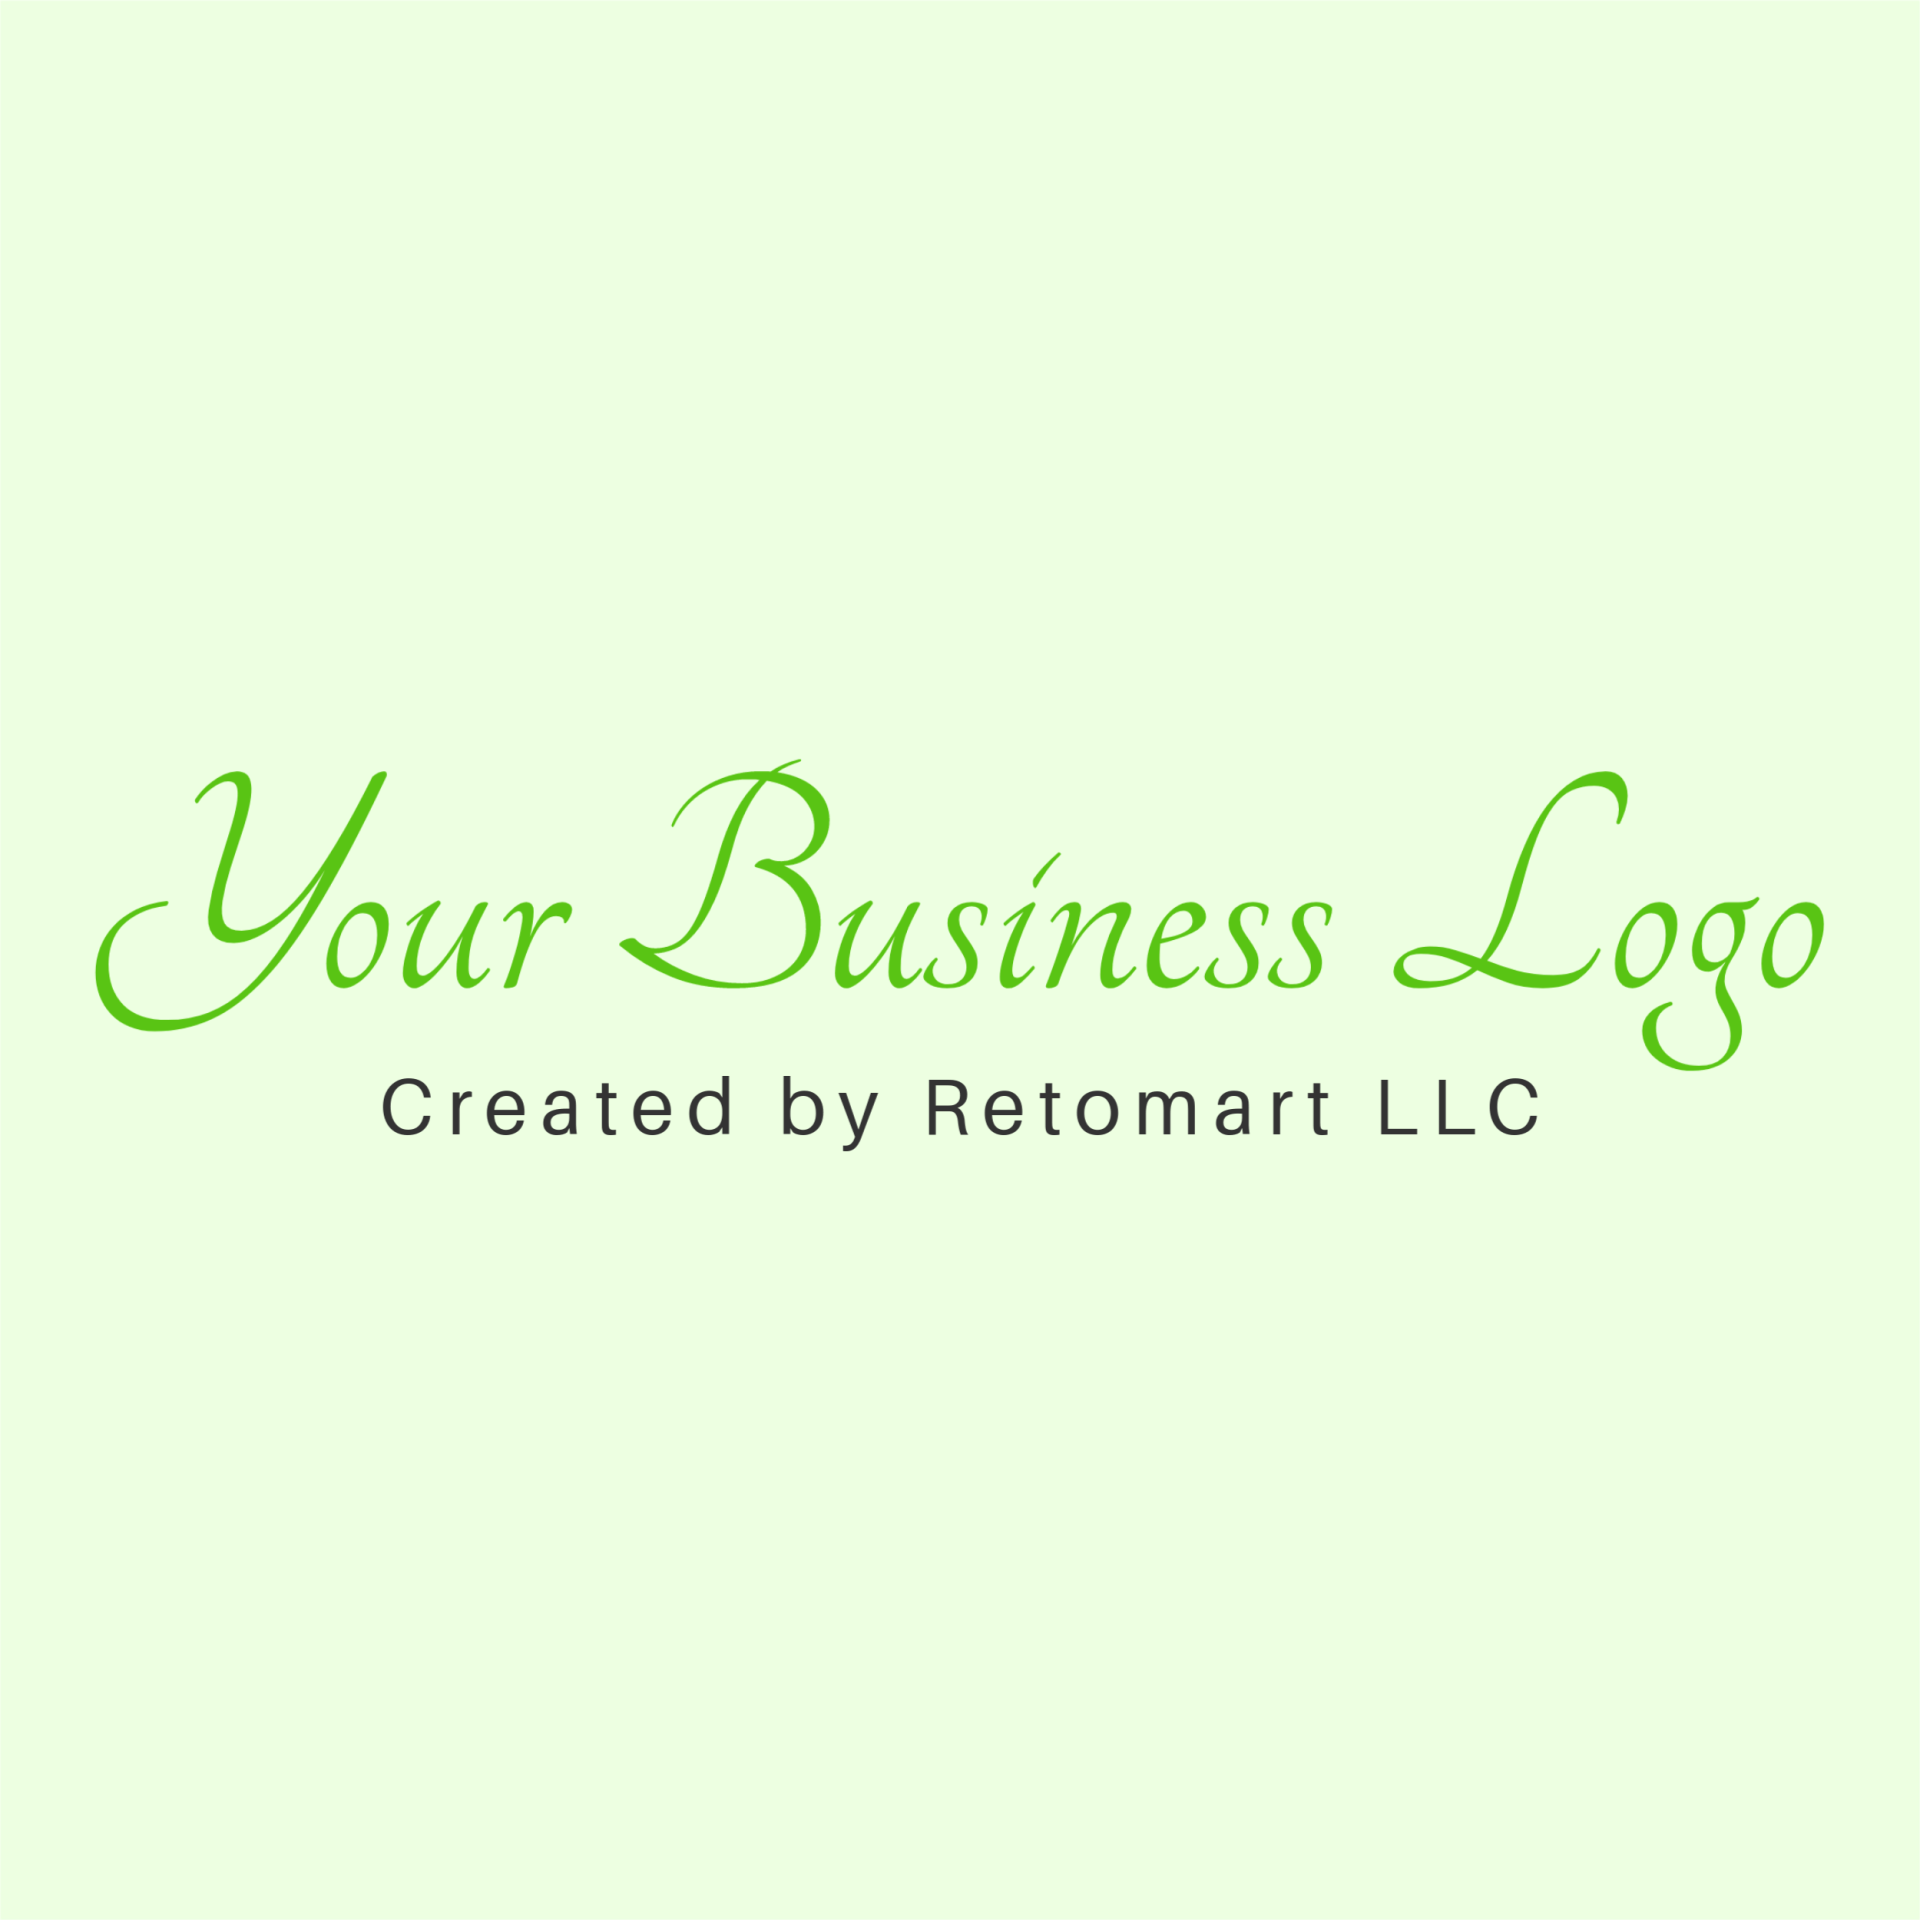 This is what your logo can look like, as a handwritten signature.